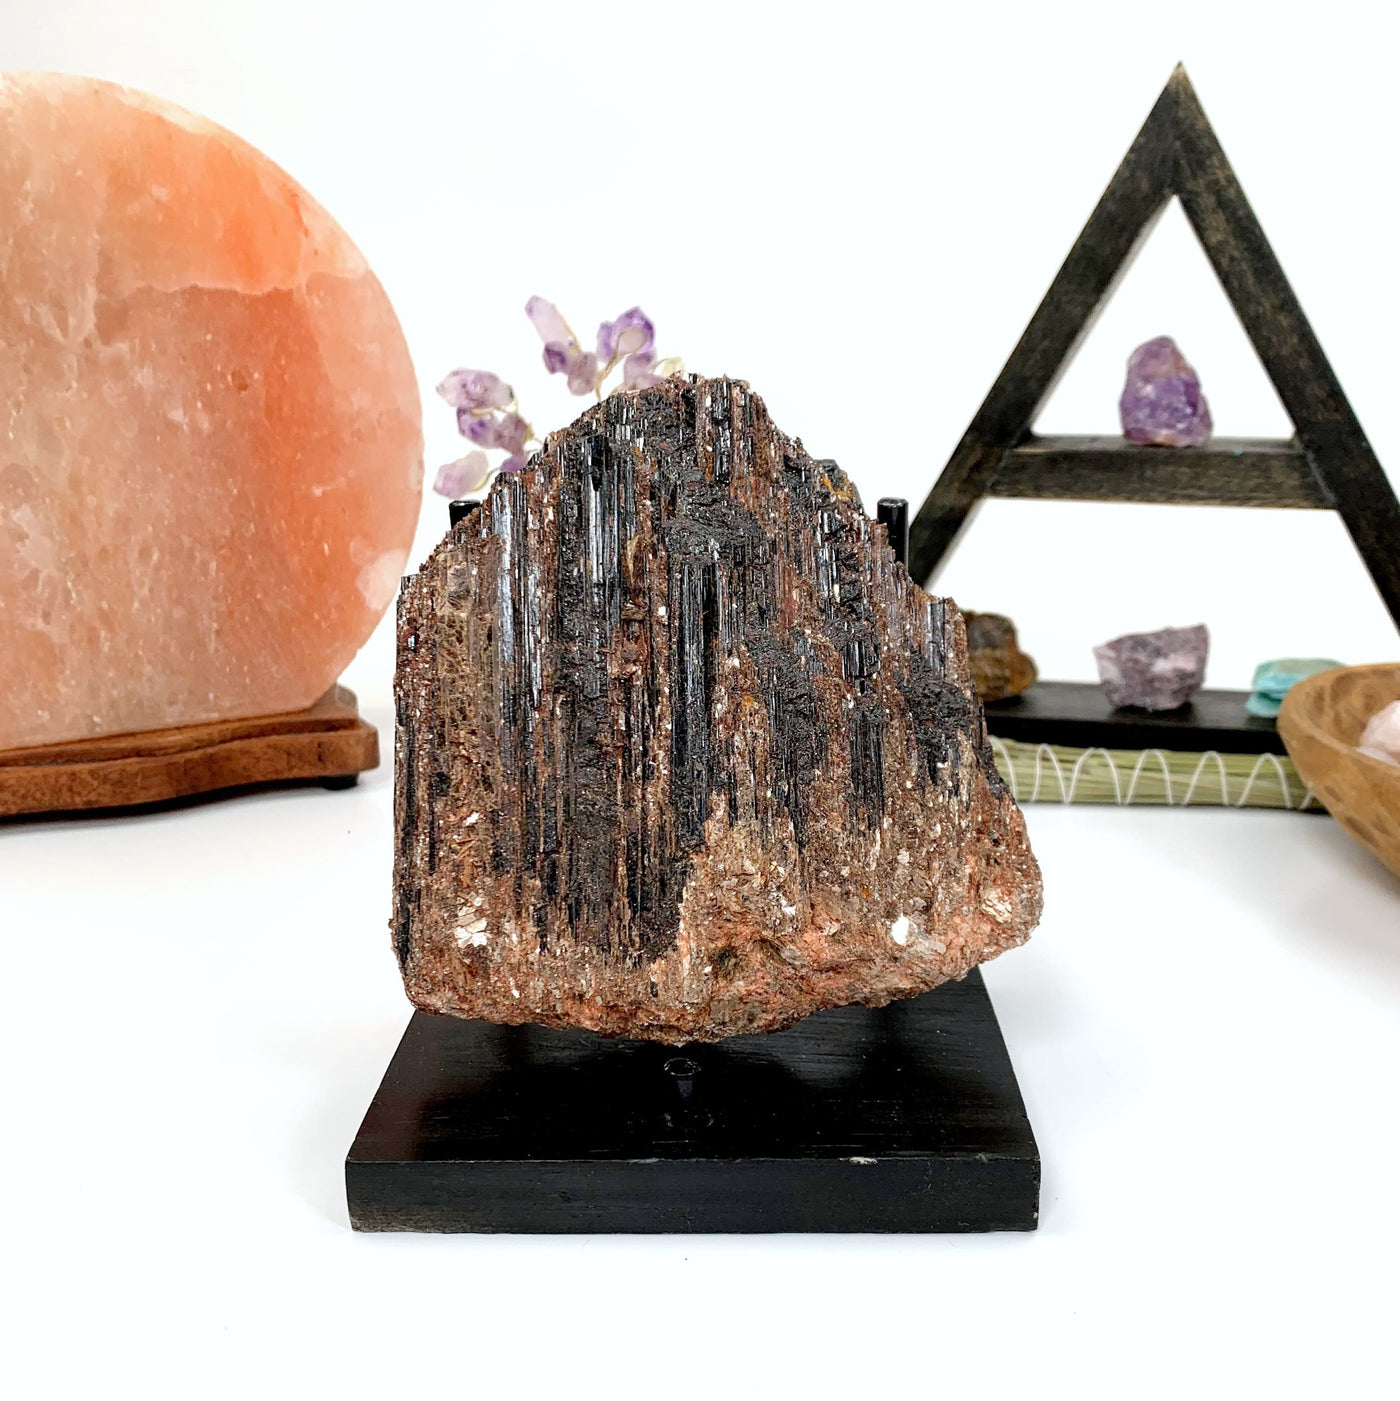 Black Tourmaline with Mica with decorations in the background